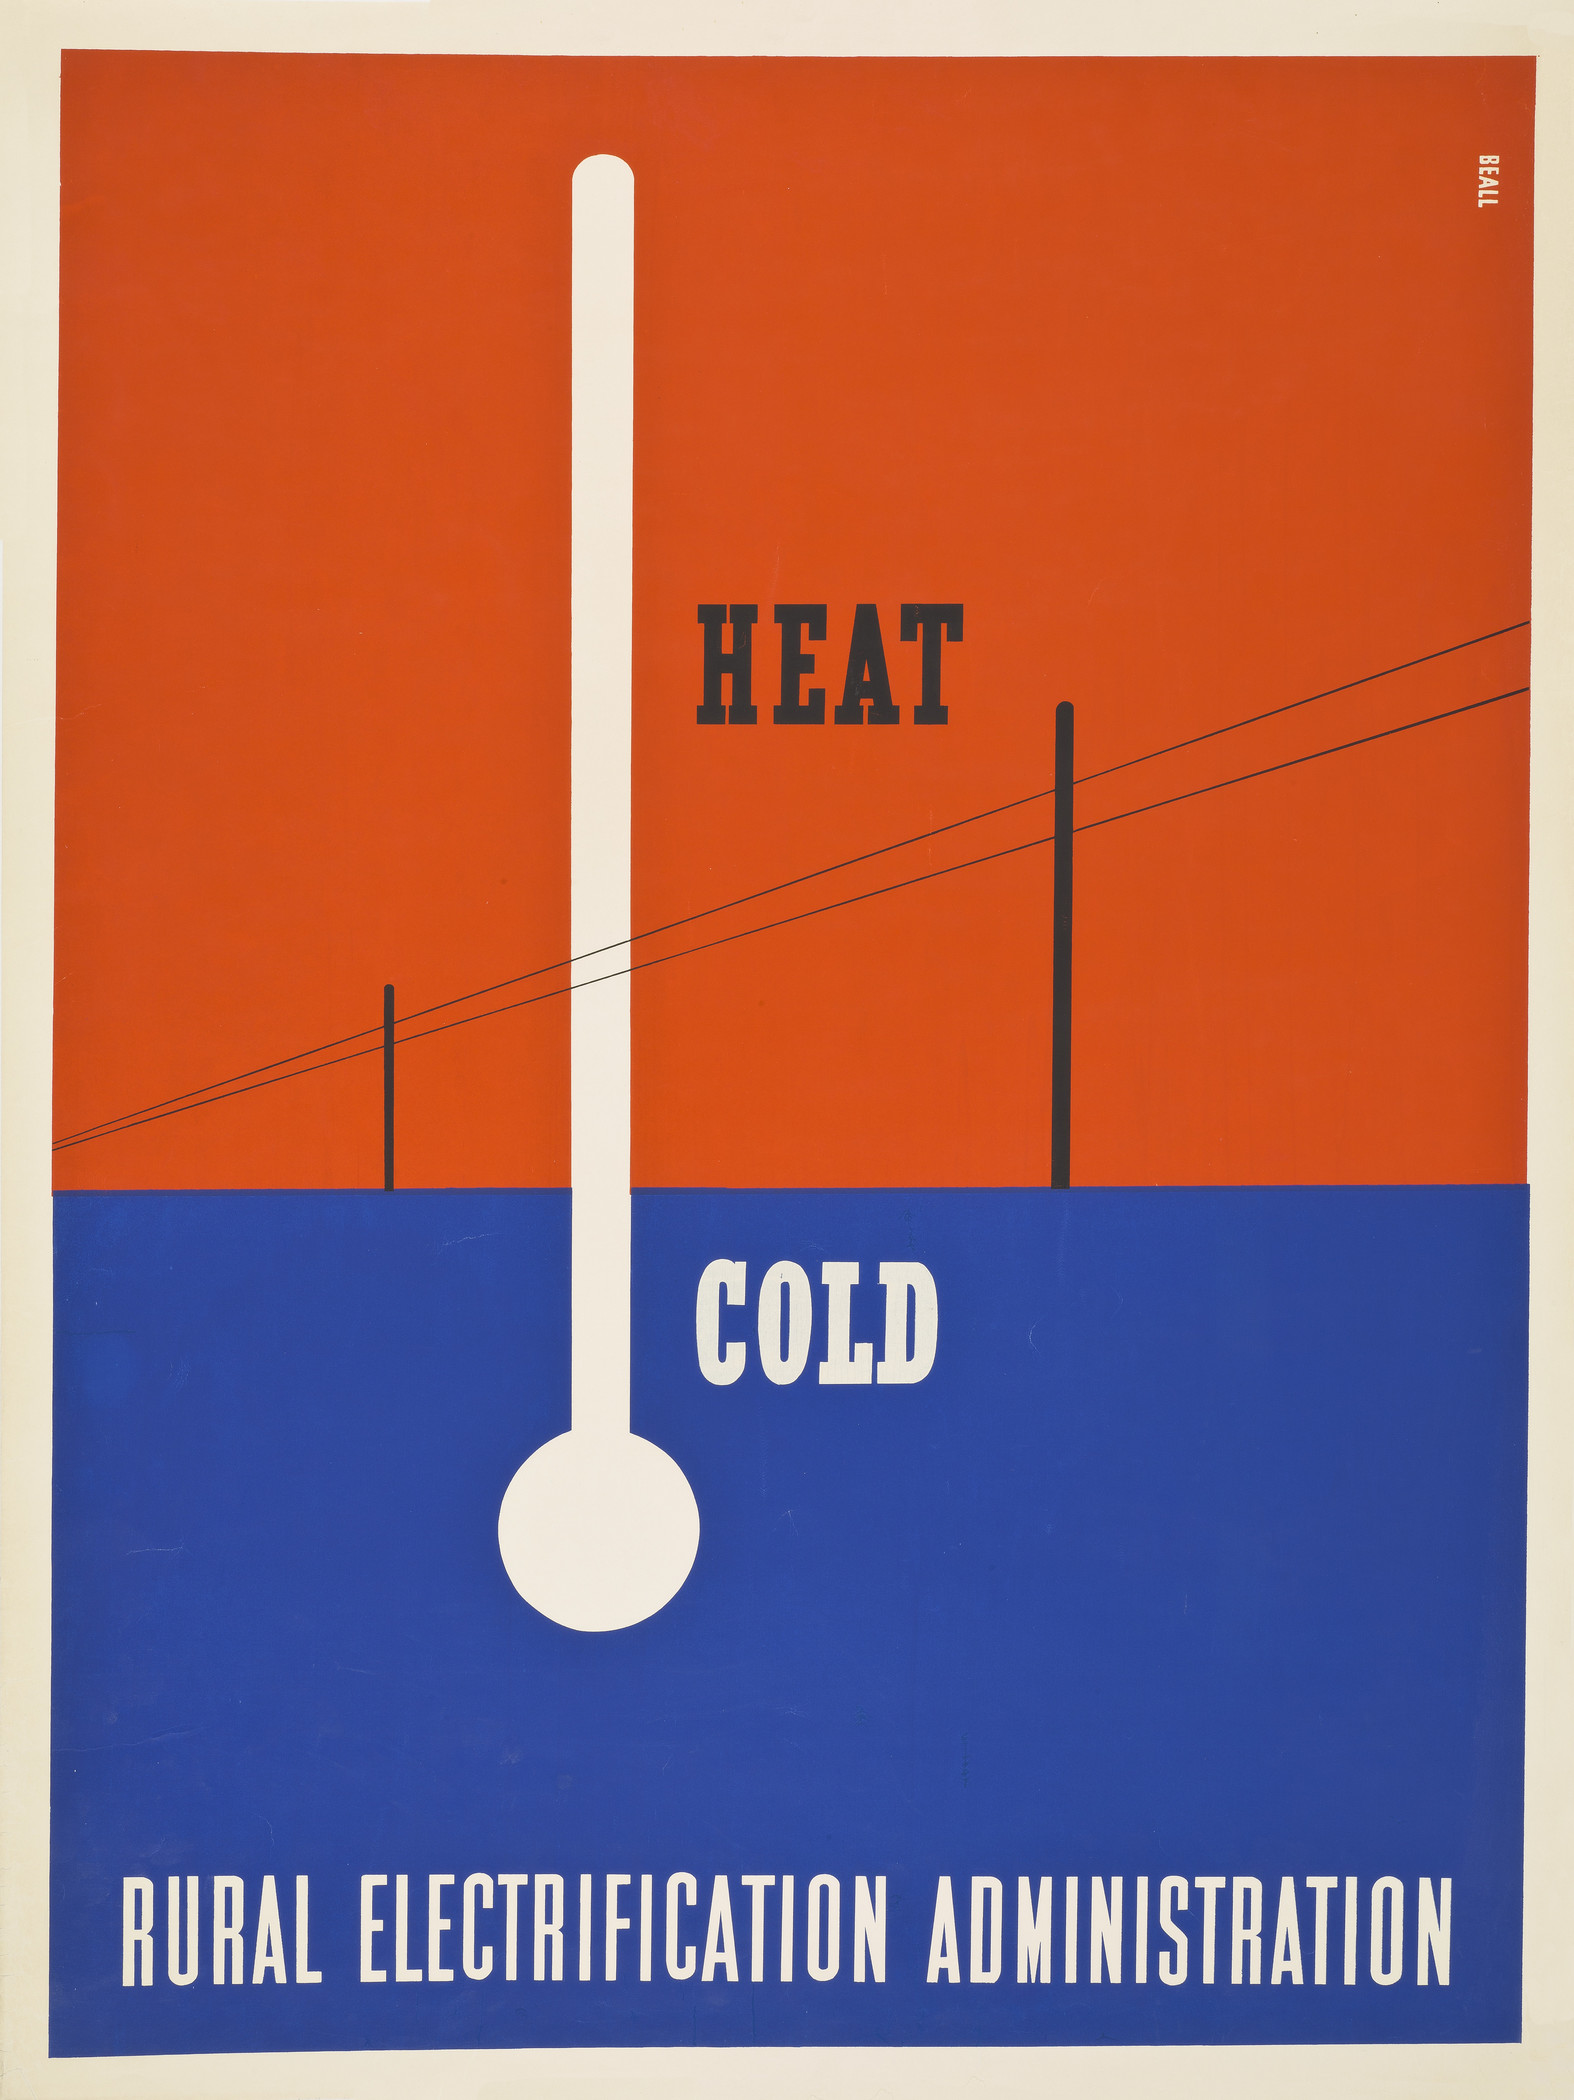 Lester Beall, Heat-Cold, 1937, Los Angeles County Museum of Art, purchased with funds provided by Allison and Larry Berg, Viveca Paulin-Ferrell and Will Ferrell, Suzanne and Ric Kayne, and Maura and Mark Resnick through the 2013 Decorative Arts and Design Acquisition Committee (DA2), photo © Museum Associates/LACMA